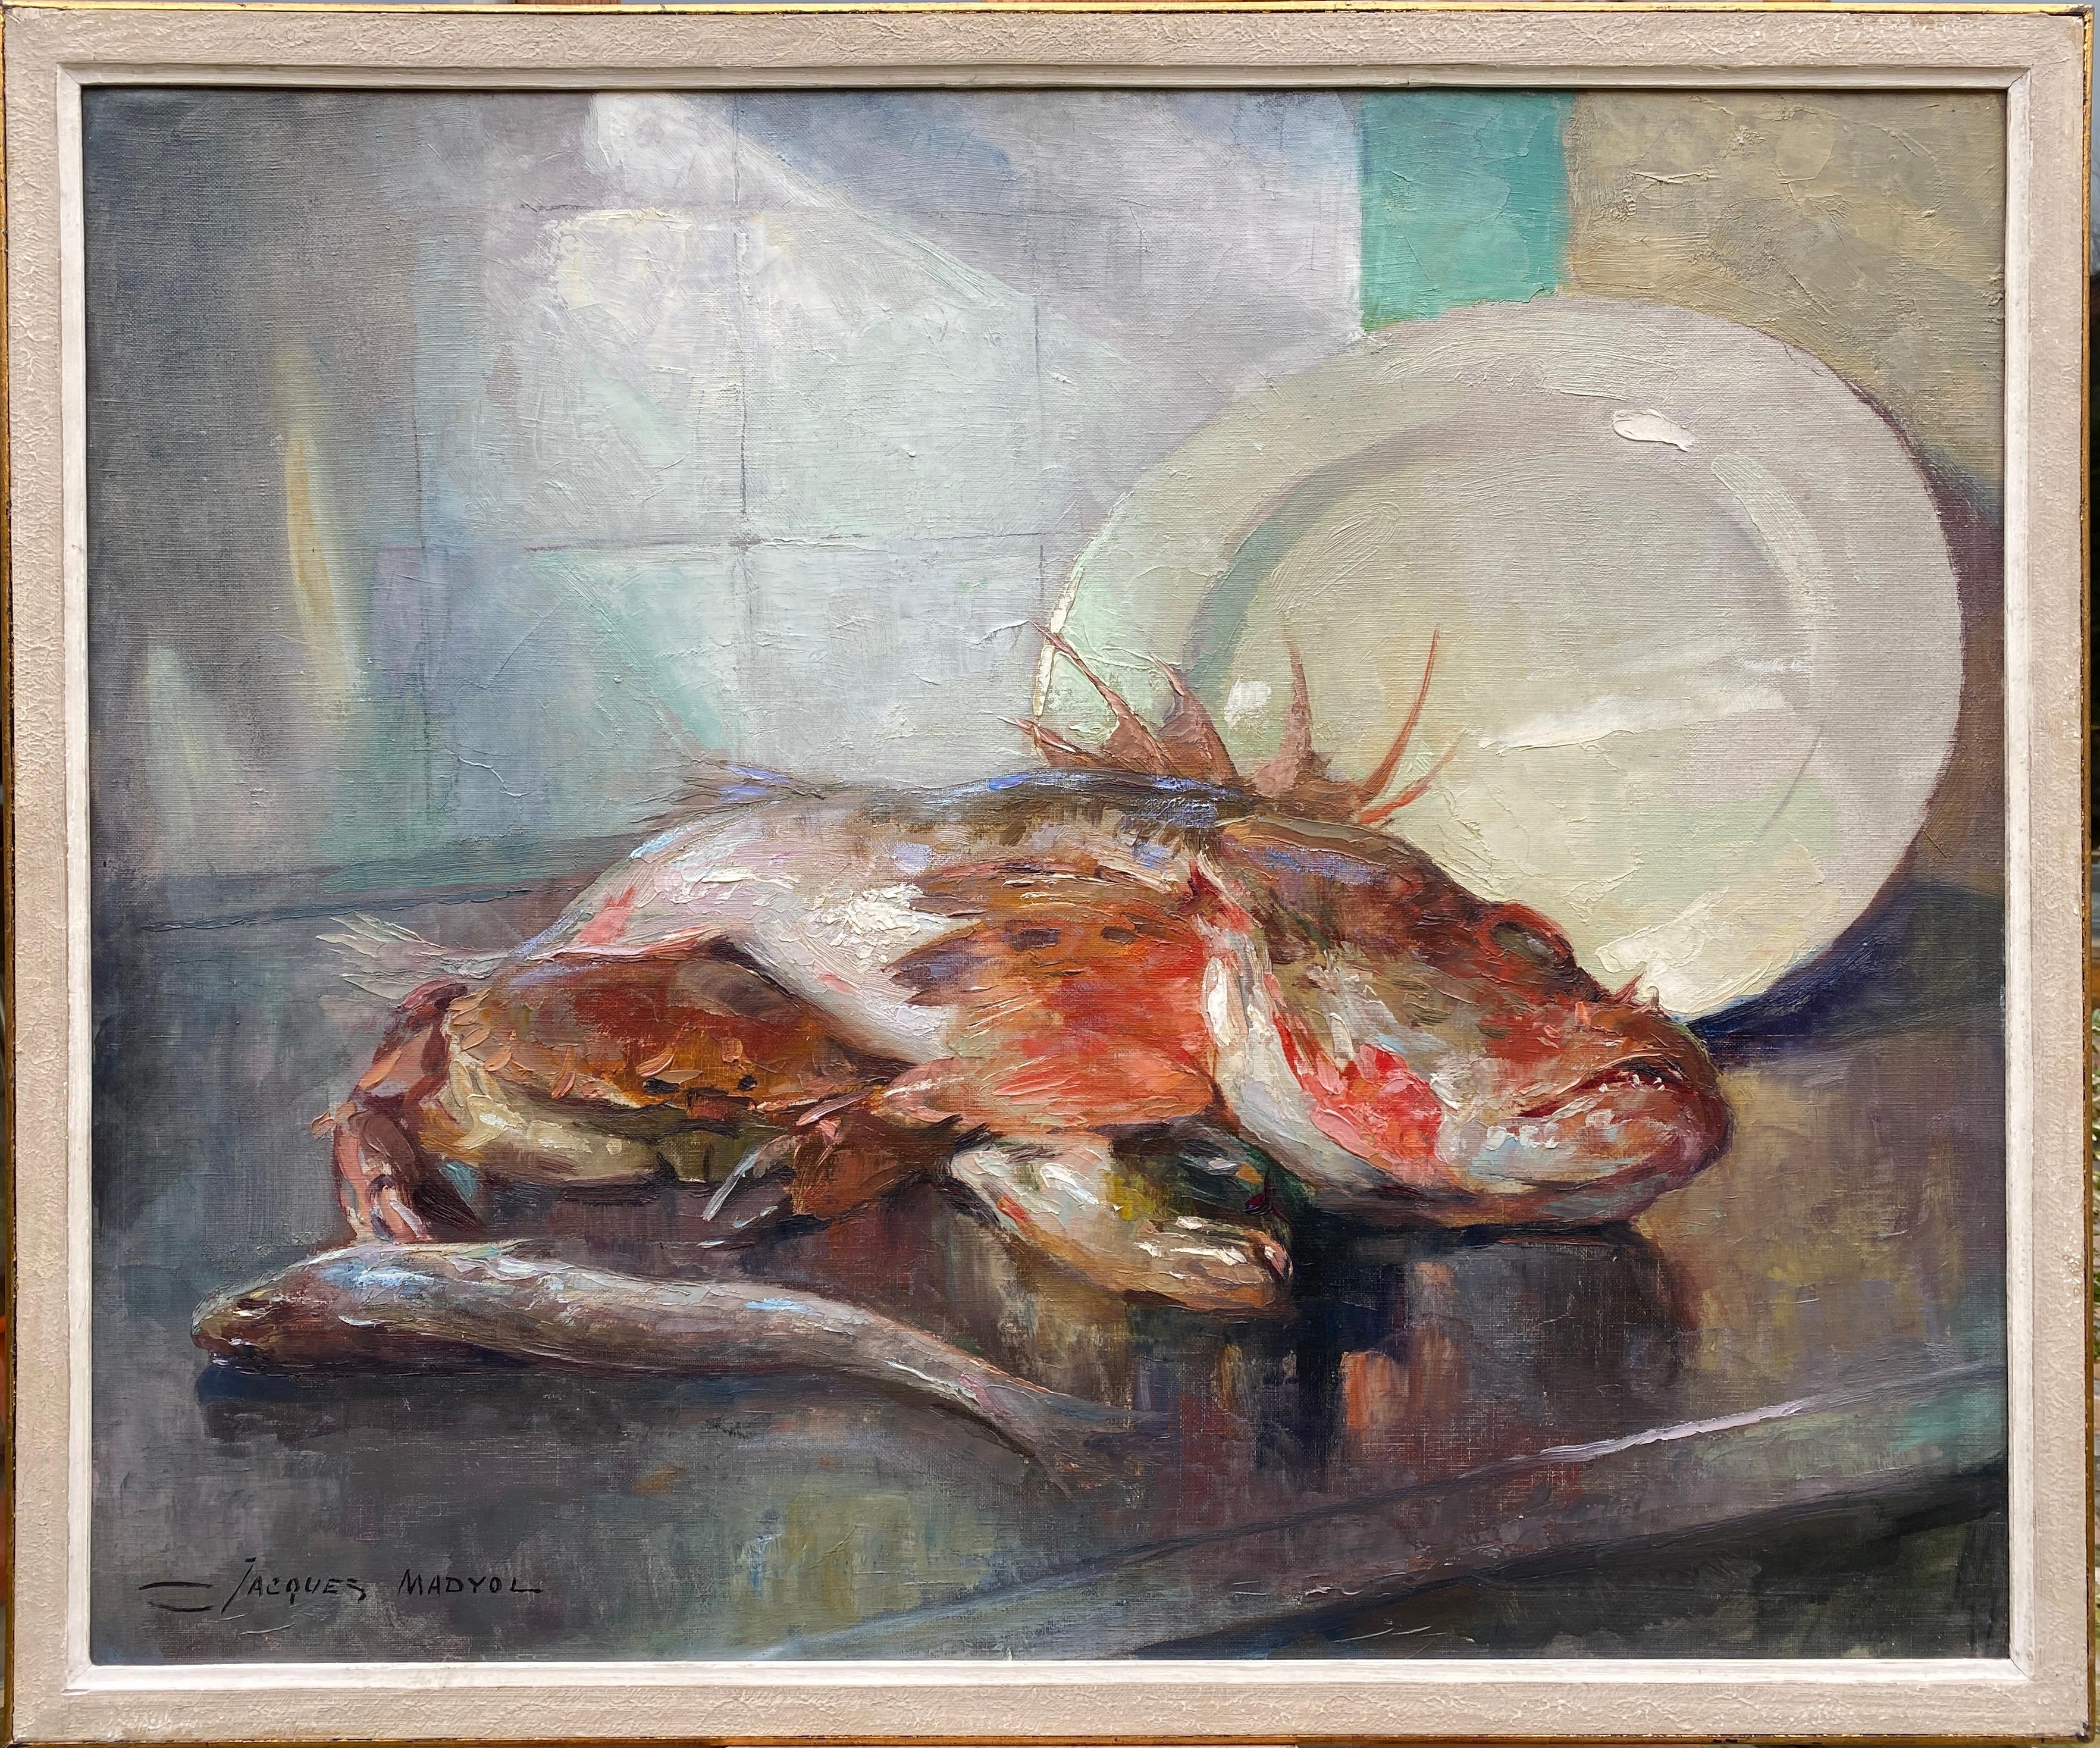 Madyol Jacques Figurative Painting - A Scorpionfish, Jacques Madyol, Brussels 1871 – 1950, Belgian Painter